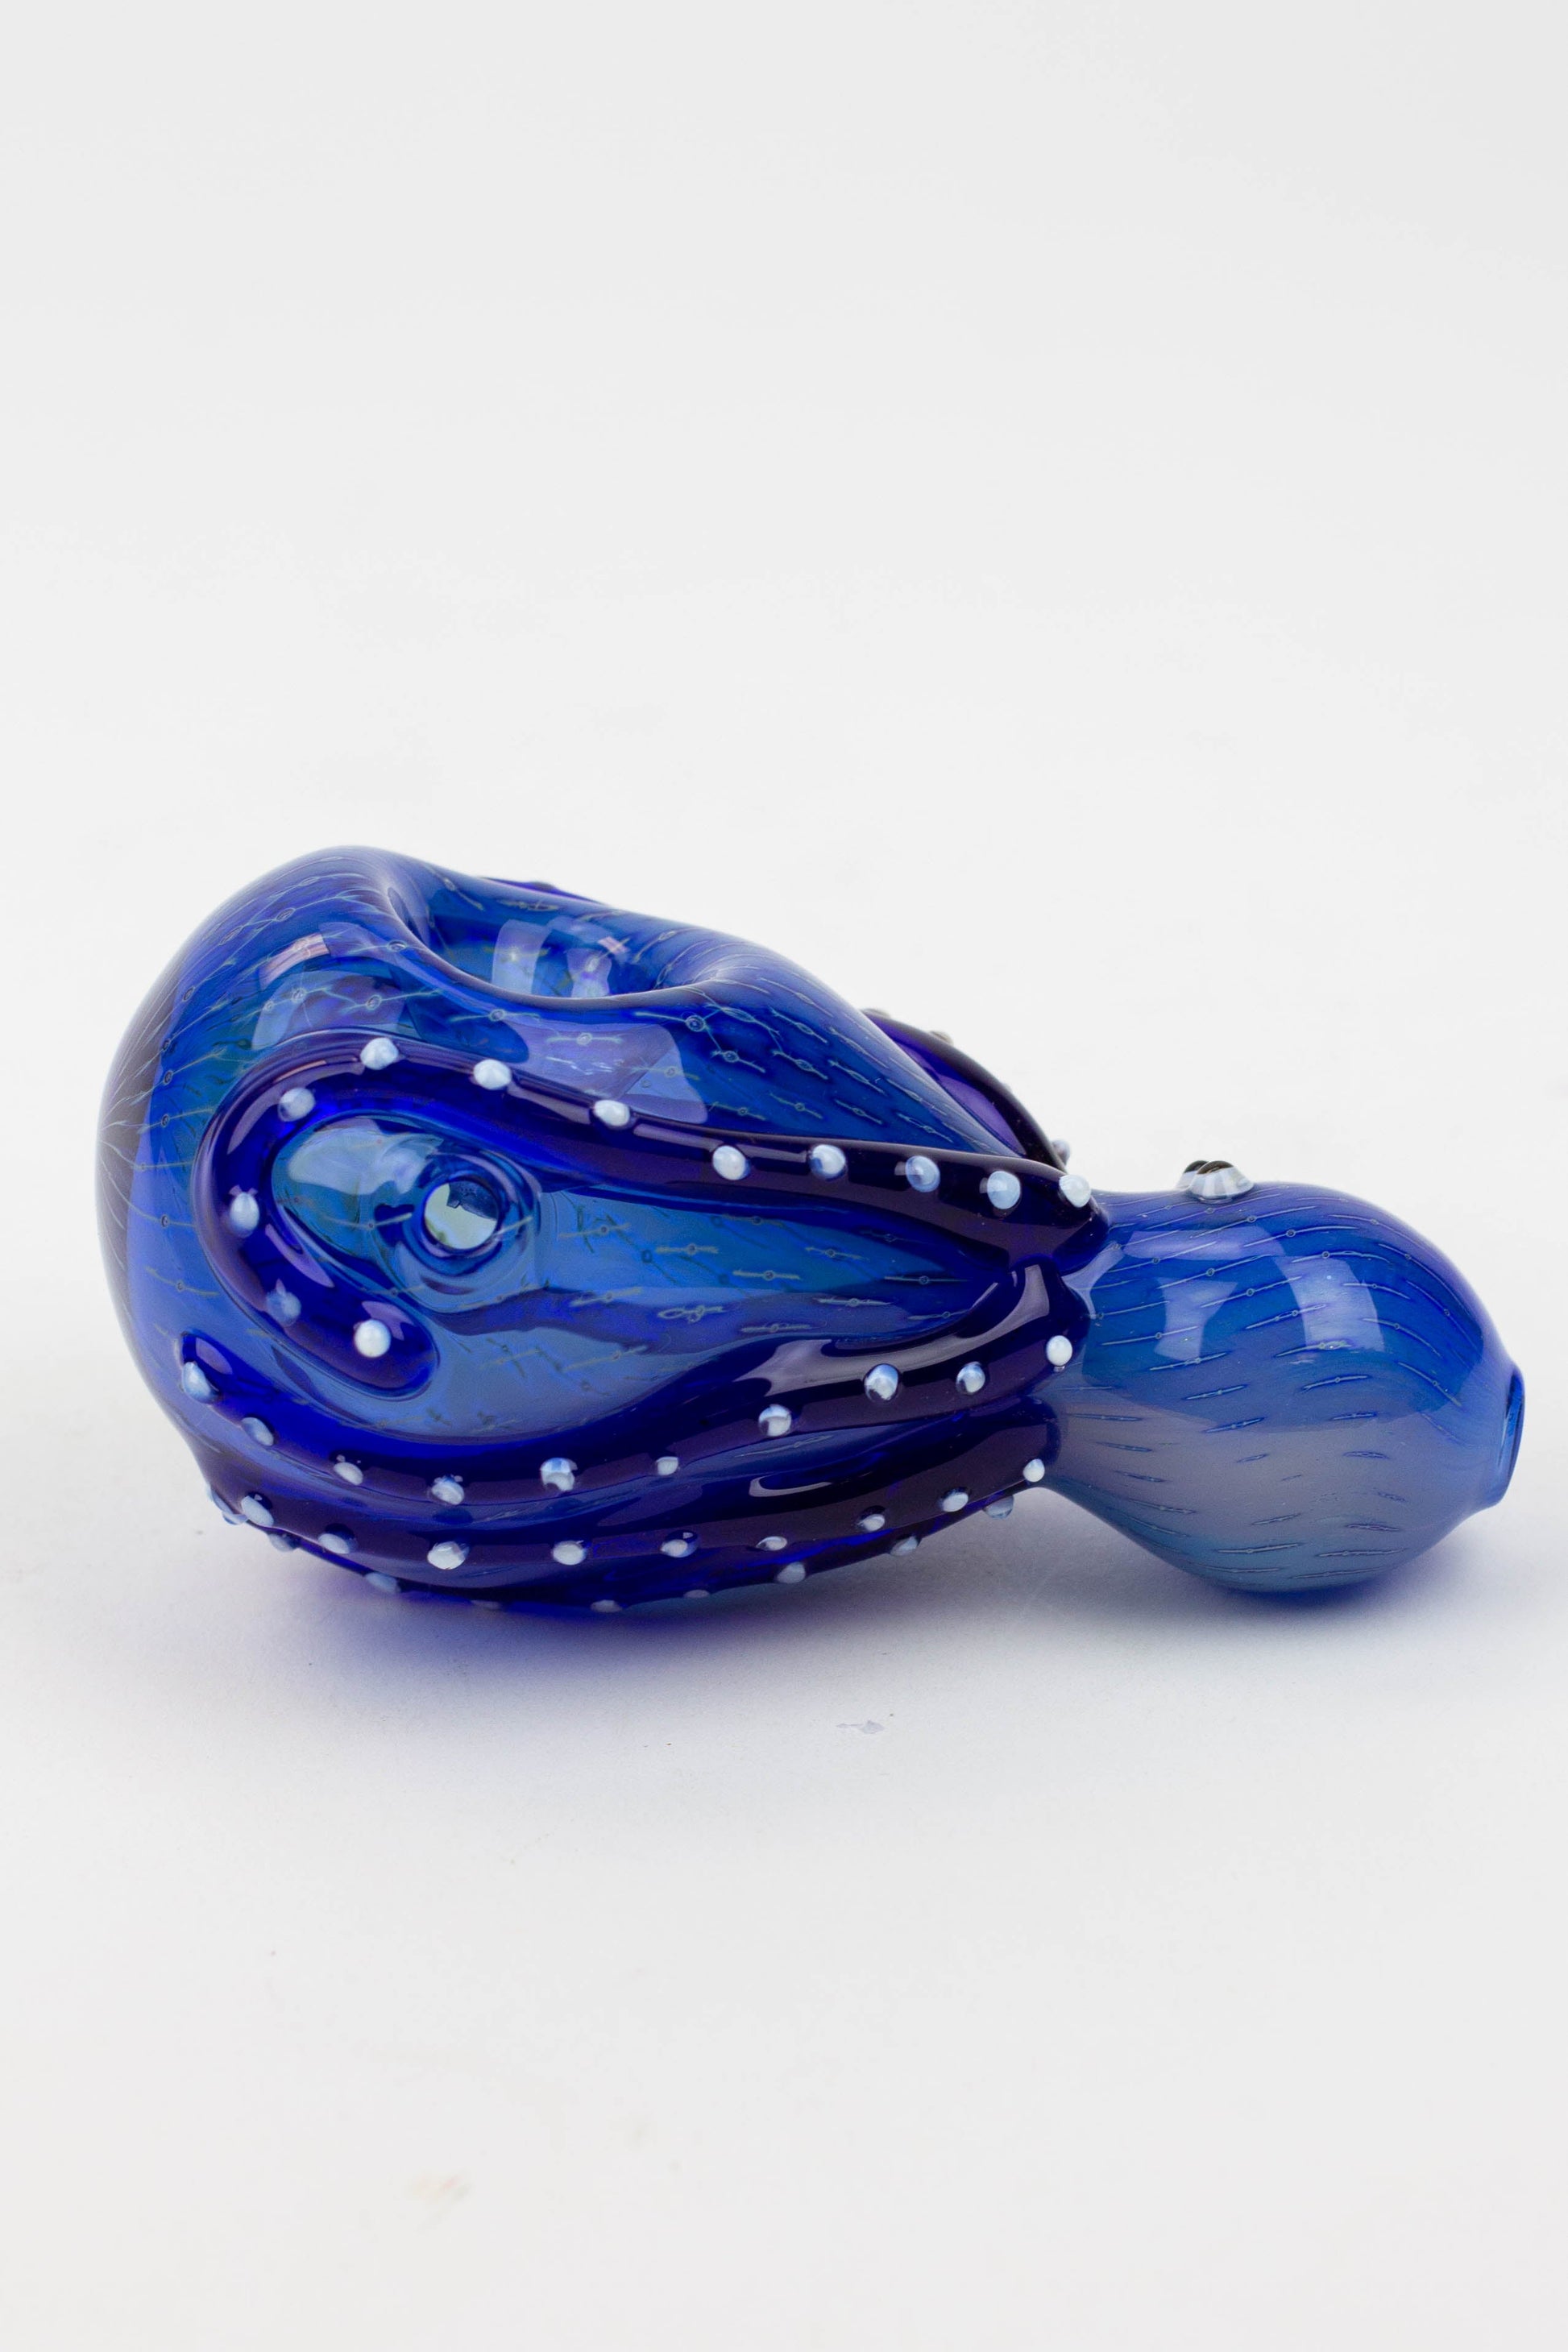 4" GLASS PIPE-OCTOPUS [XTR1040]_2